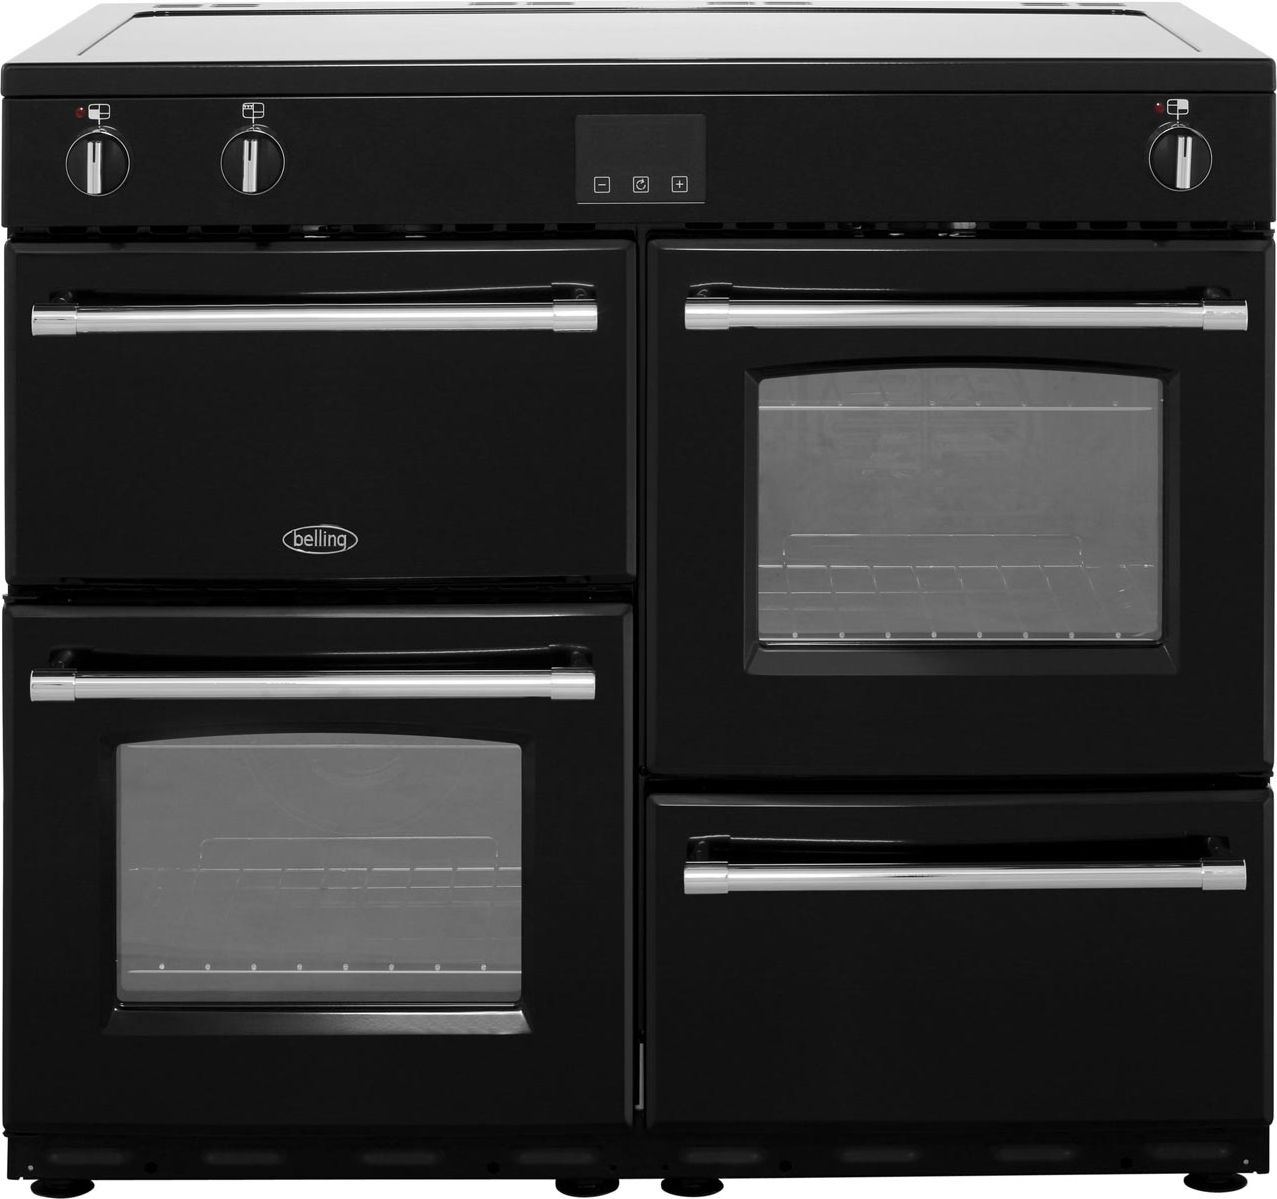 Belling Farmhouse100Ei 100cm Electric Range Cooker with Induction Hob - Black - A/A Rated, Black